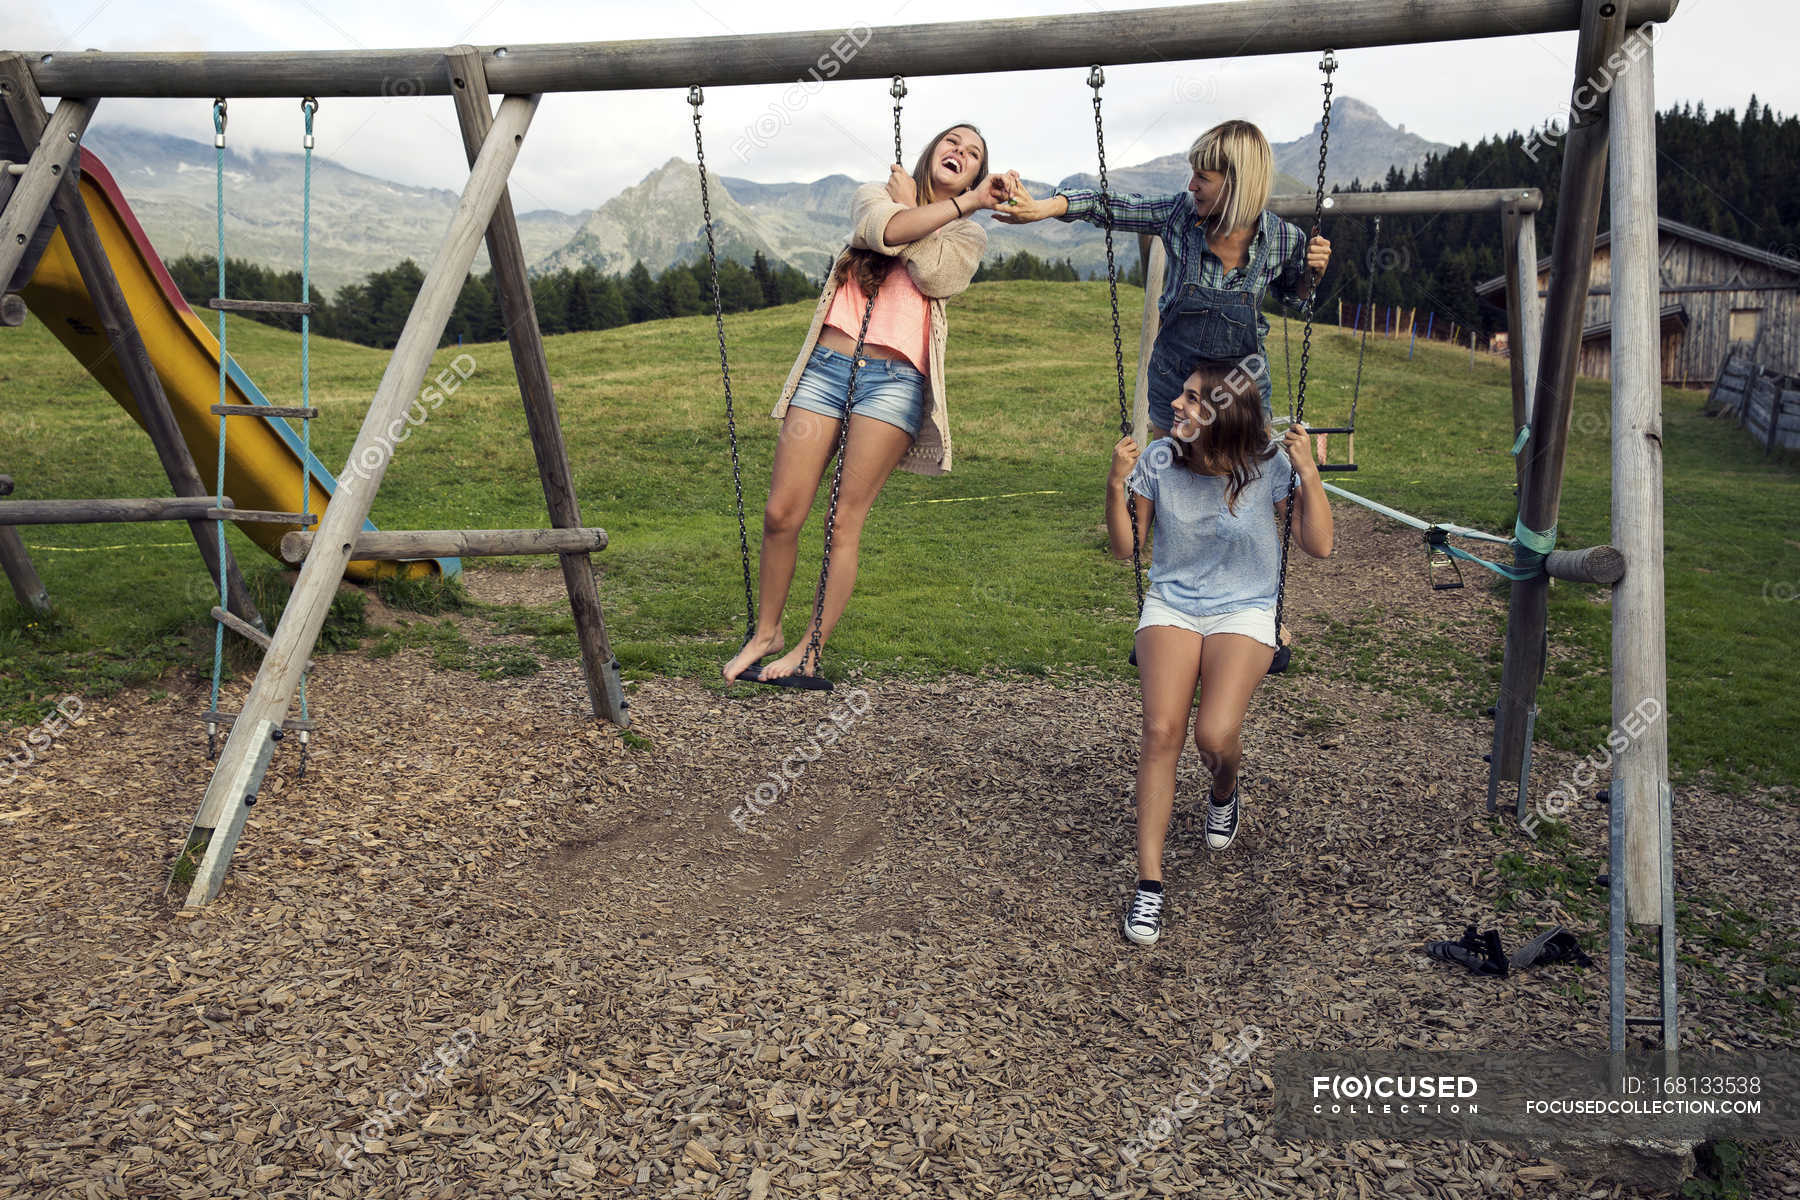 https://st.focusedcollection.com/13397678/i/1800/focused_168133538-stock-photo-three-female-adult-friends-playing.jpg